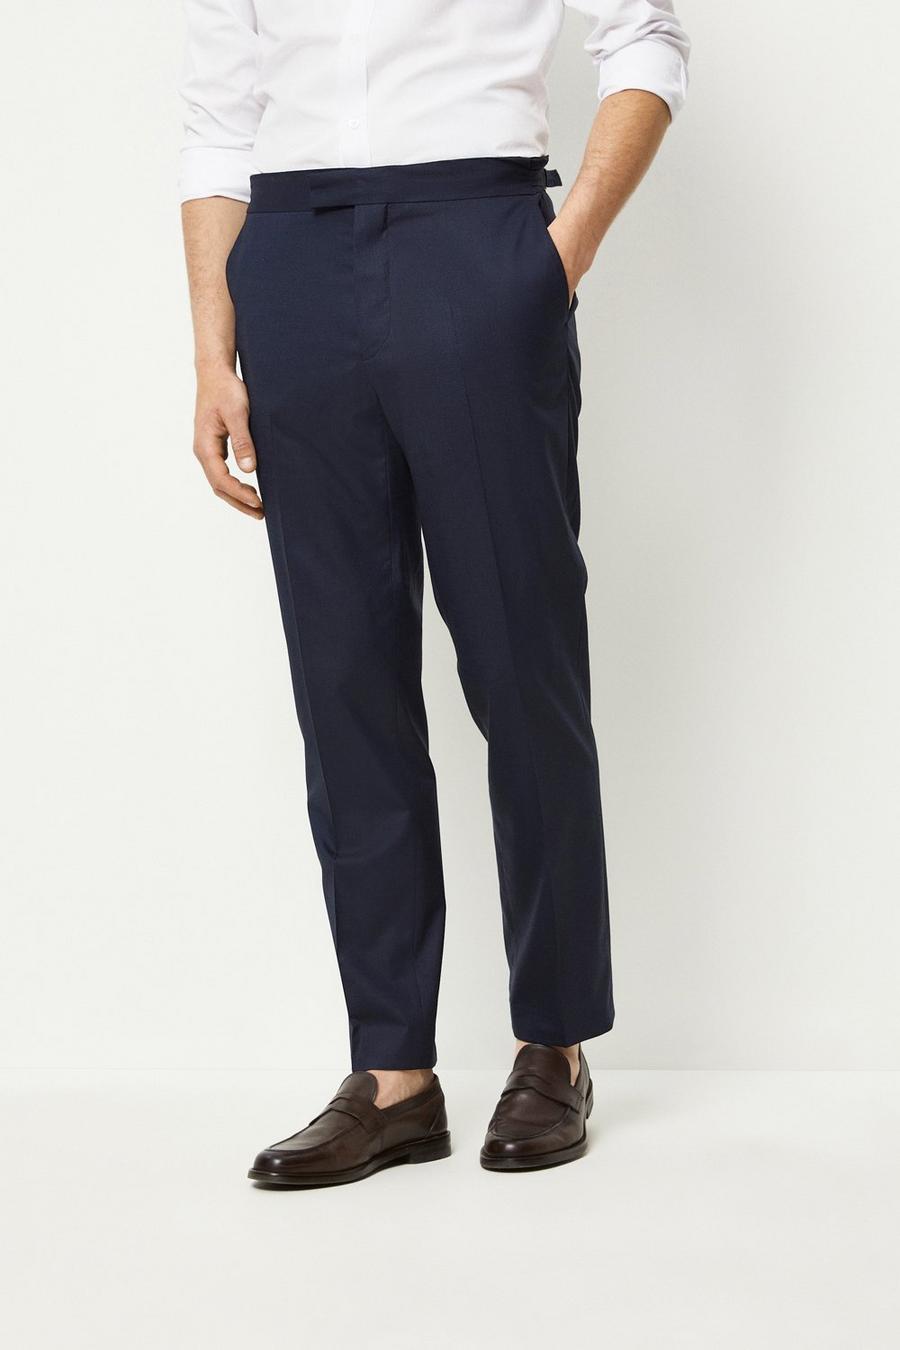 194 Tailored Fit Navy Suit Trousers